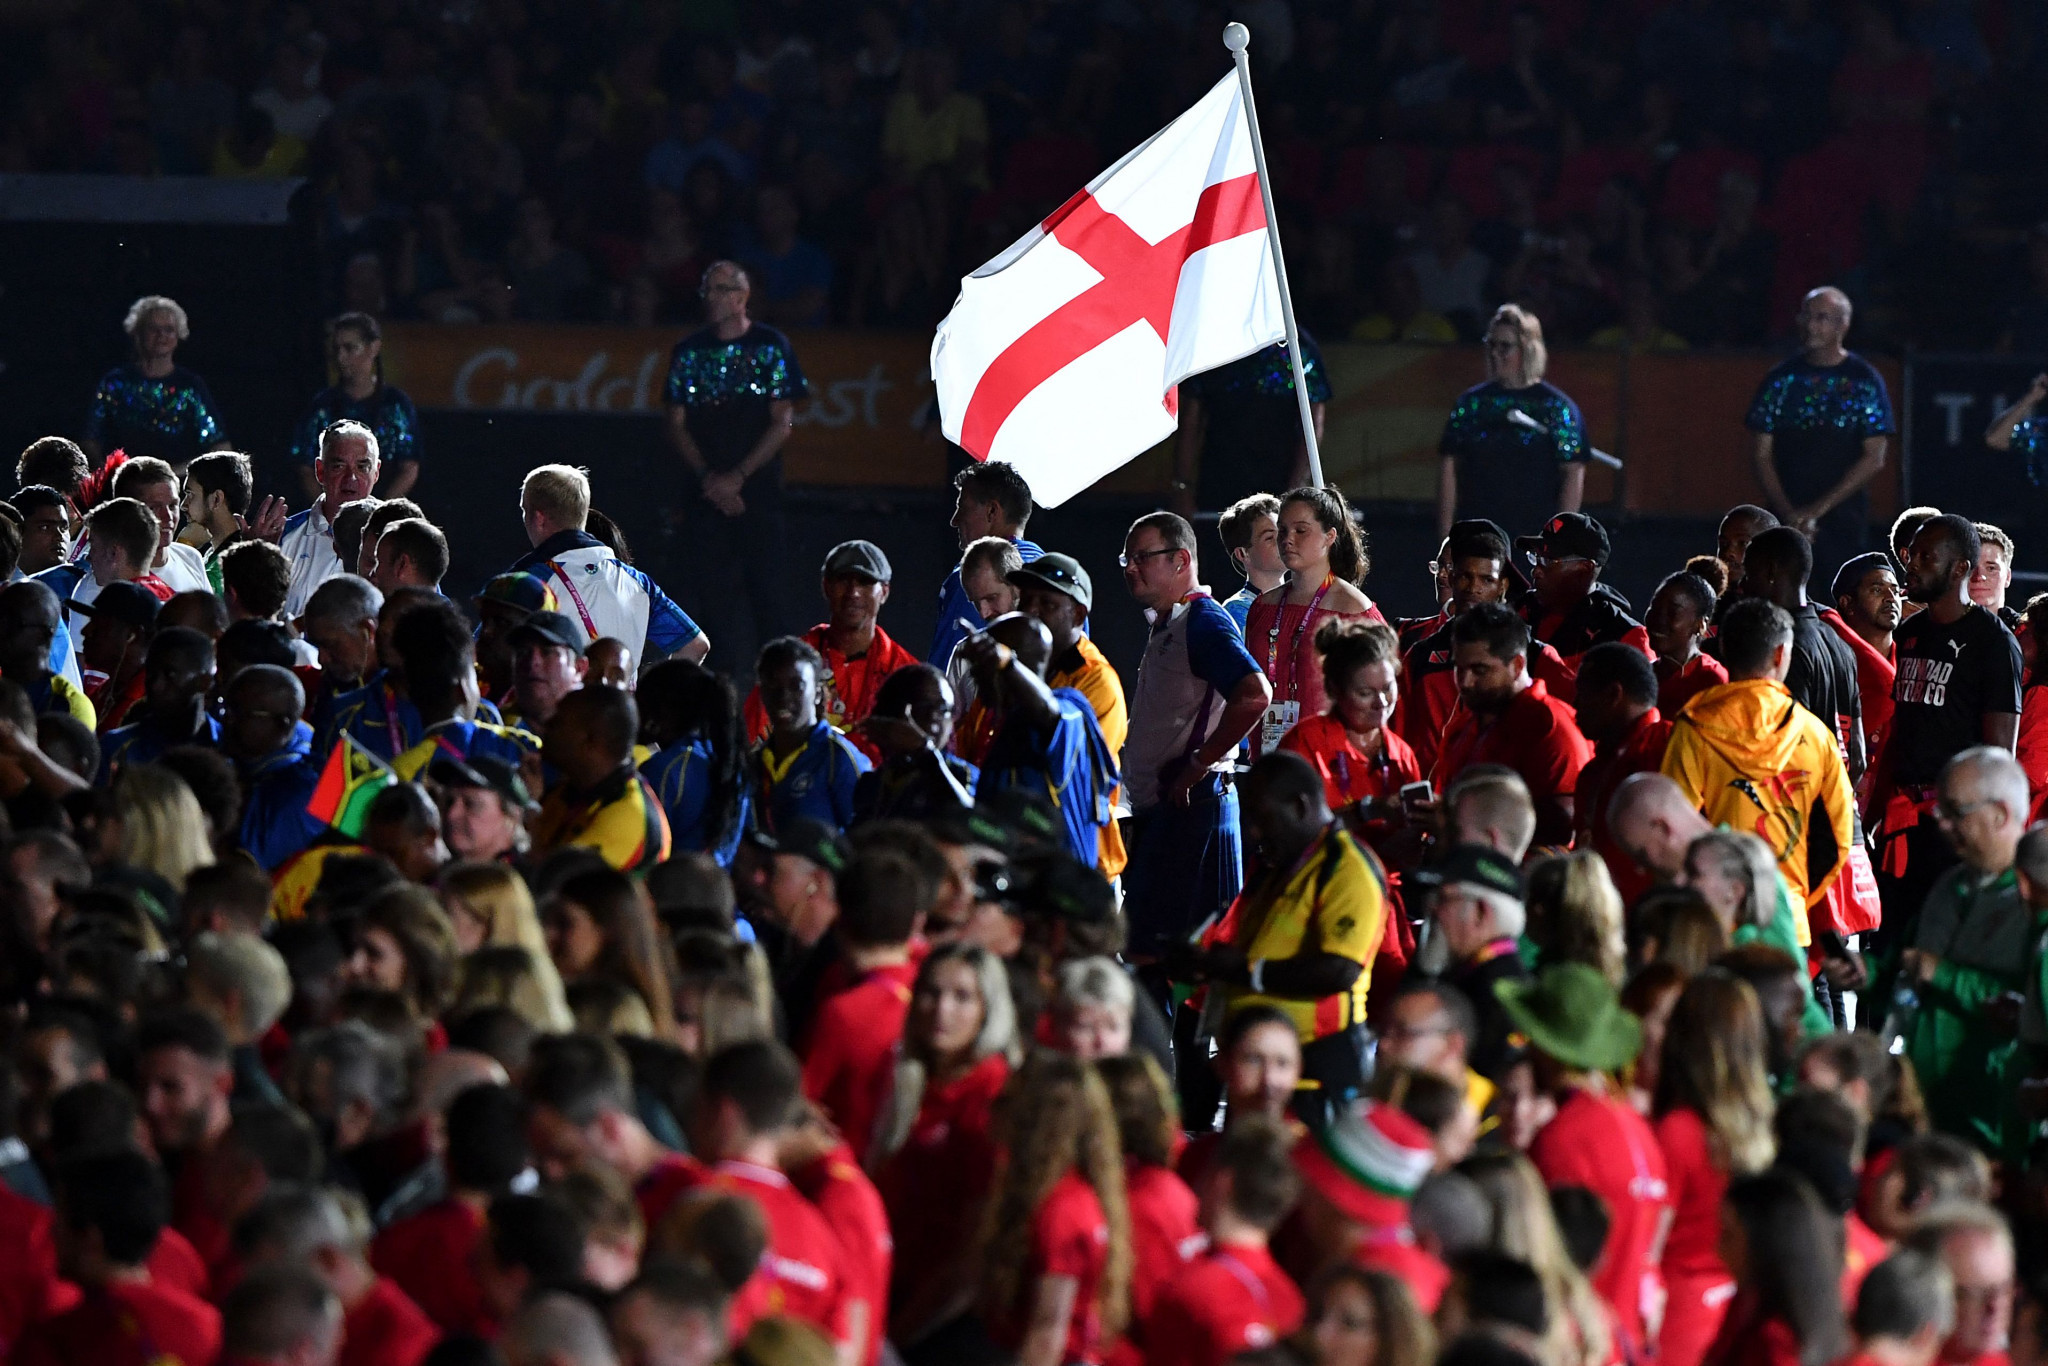 England expecting tough battle with Australia to top Birmingham 2022 medal table